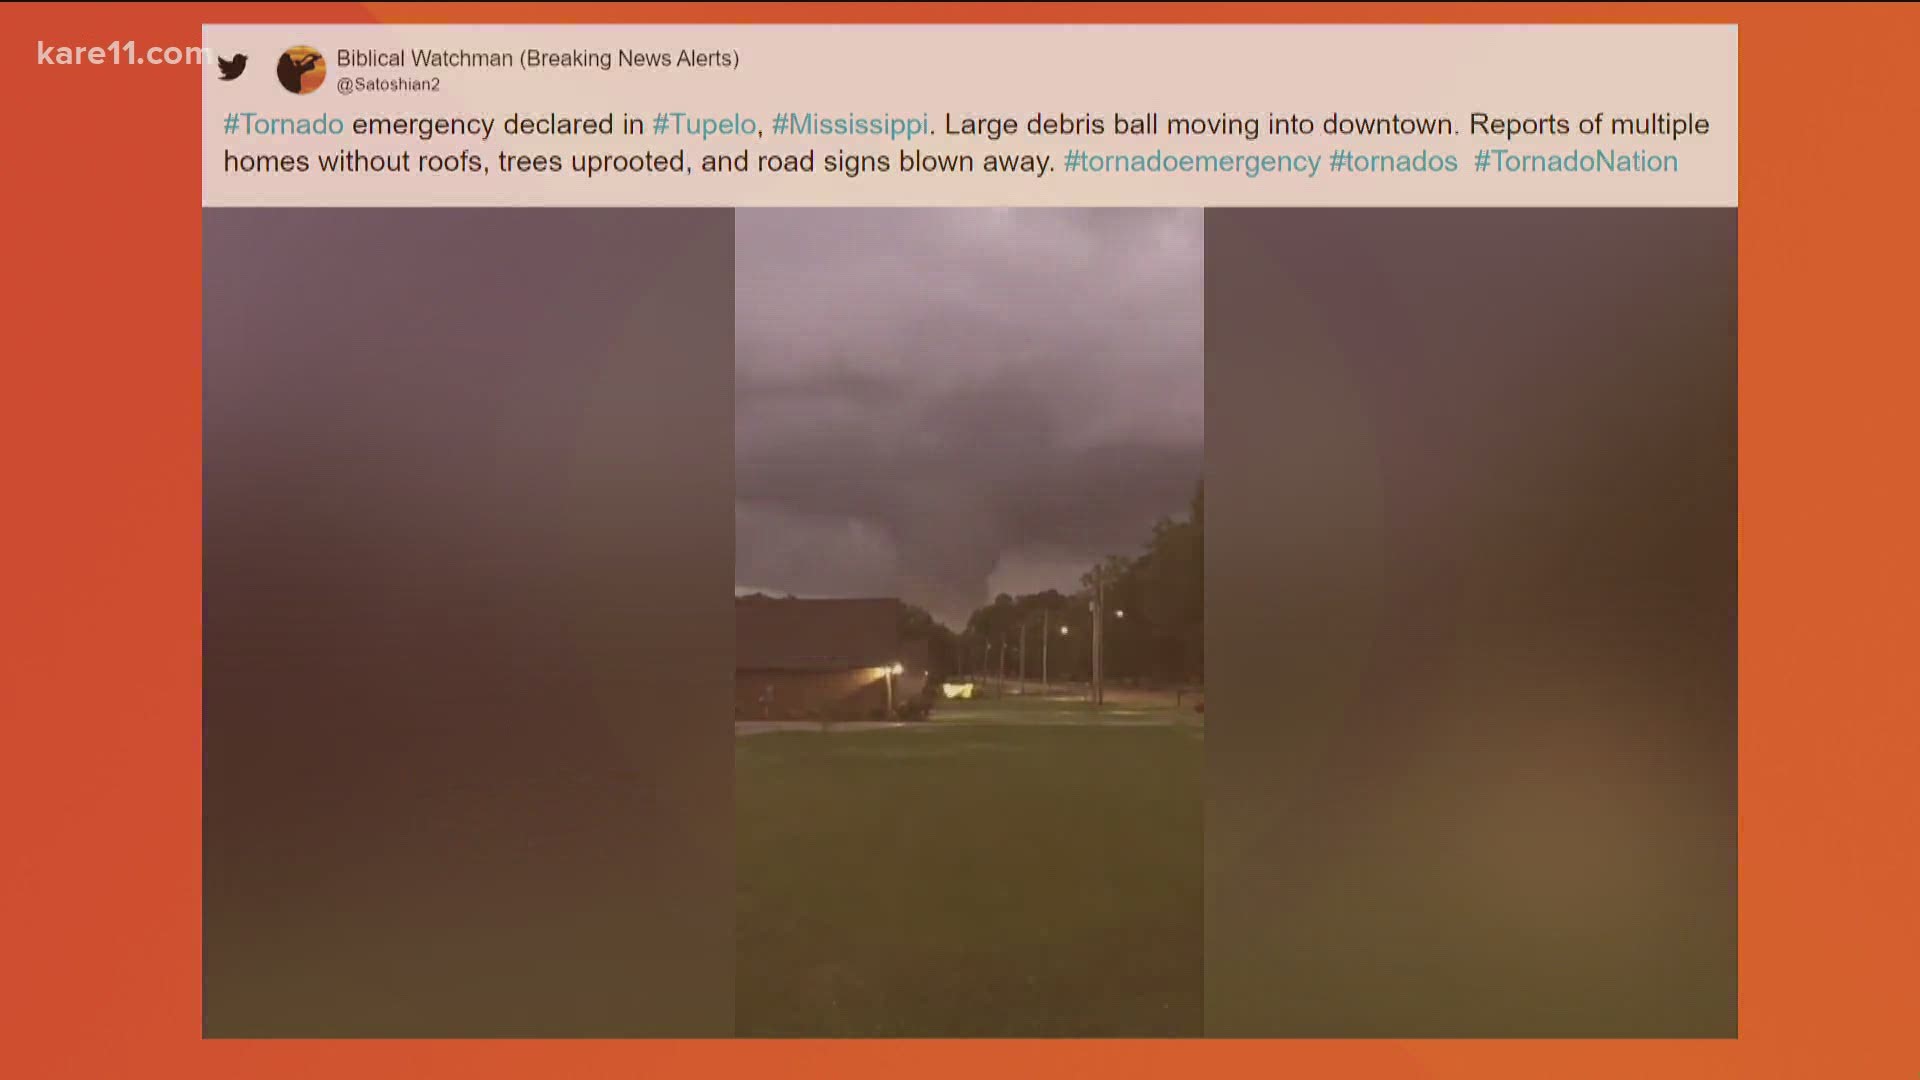 Pictures and video showing storm damage are coming out of Tupelo, MS